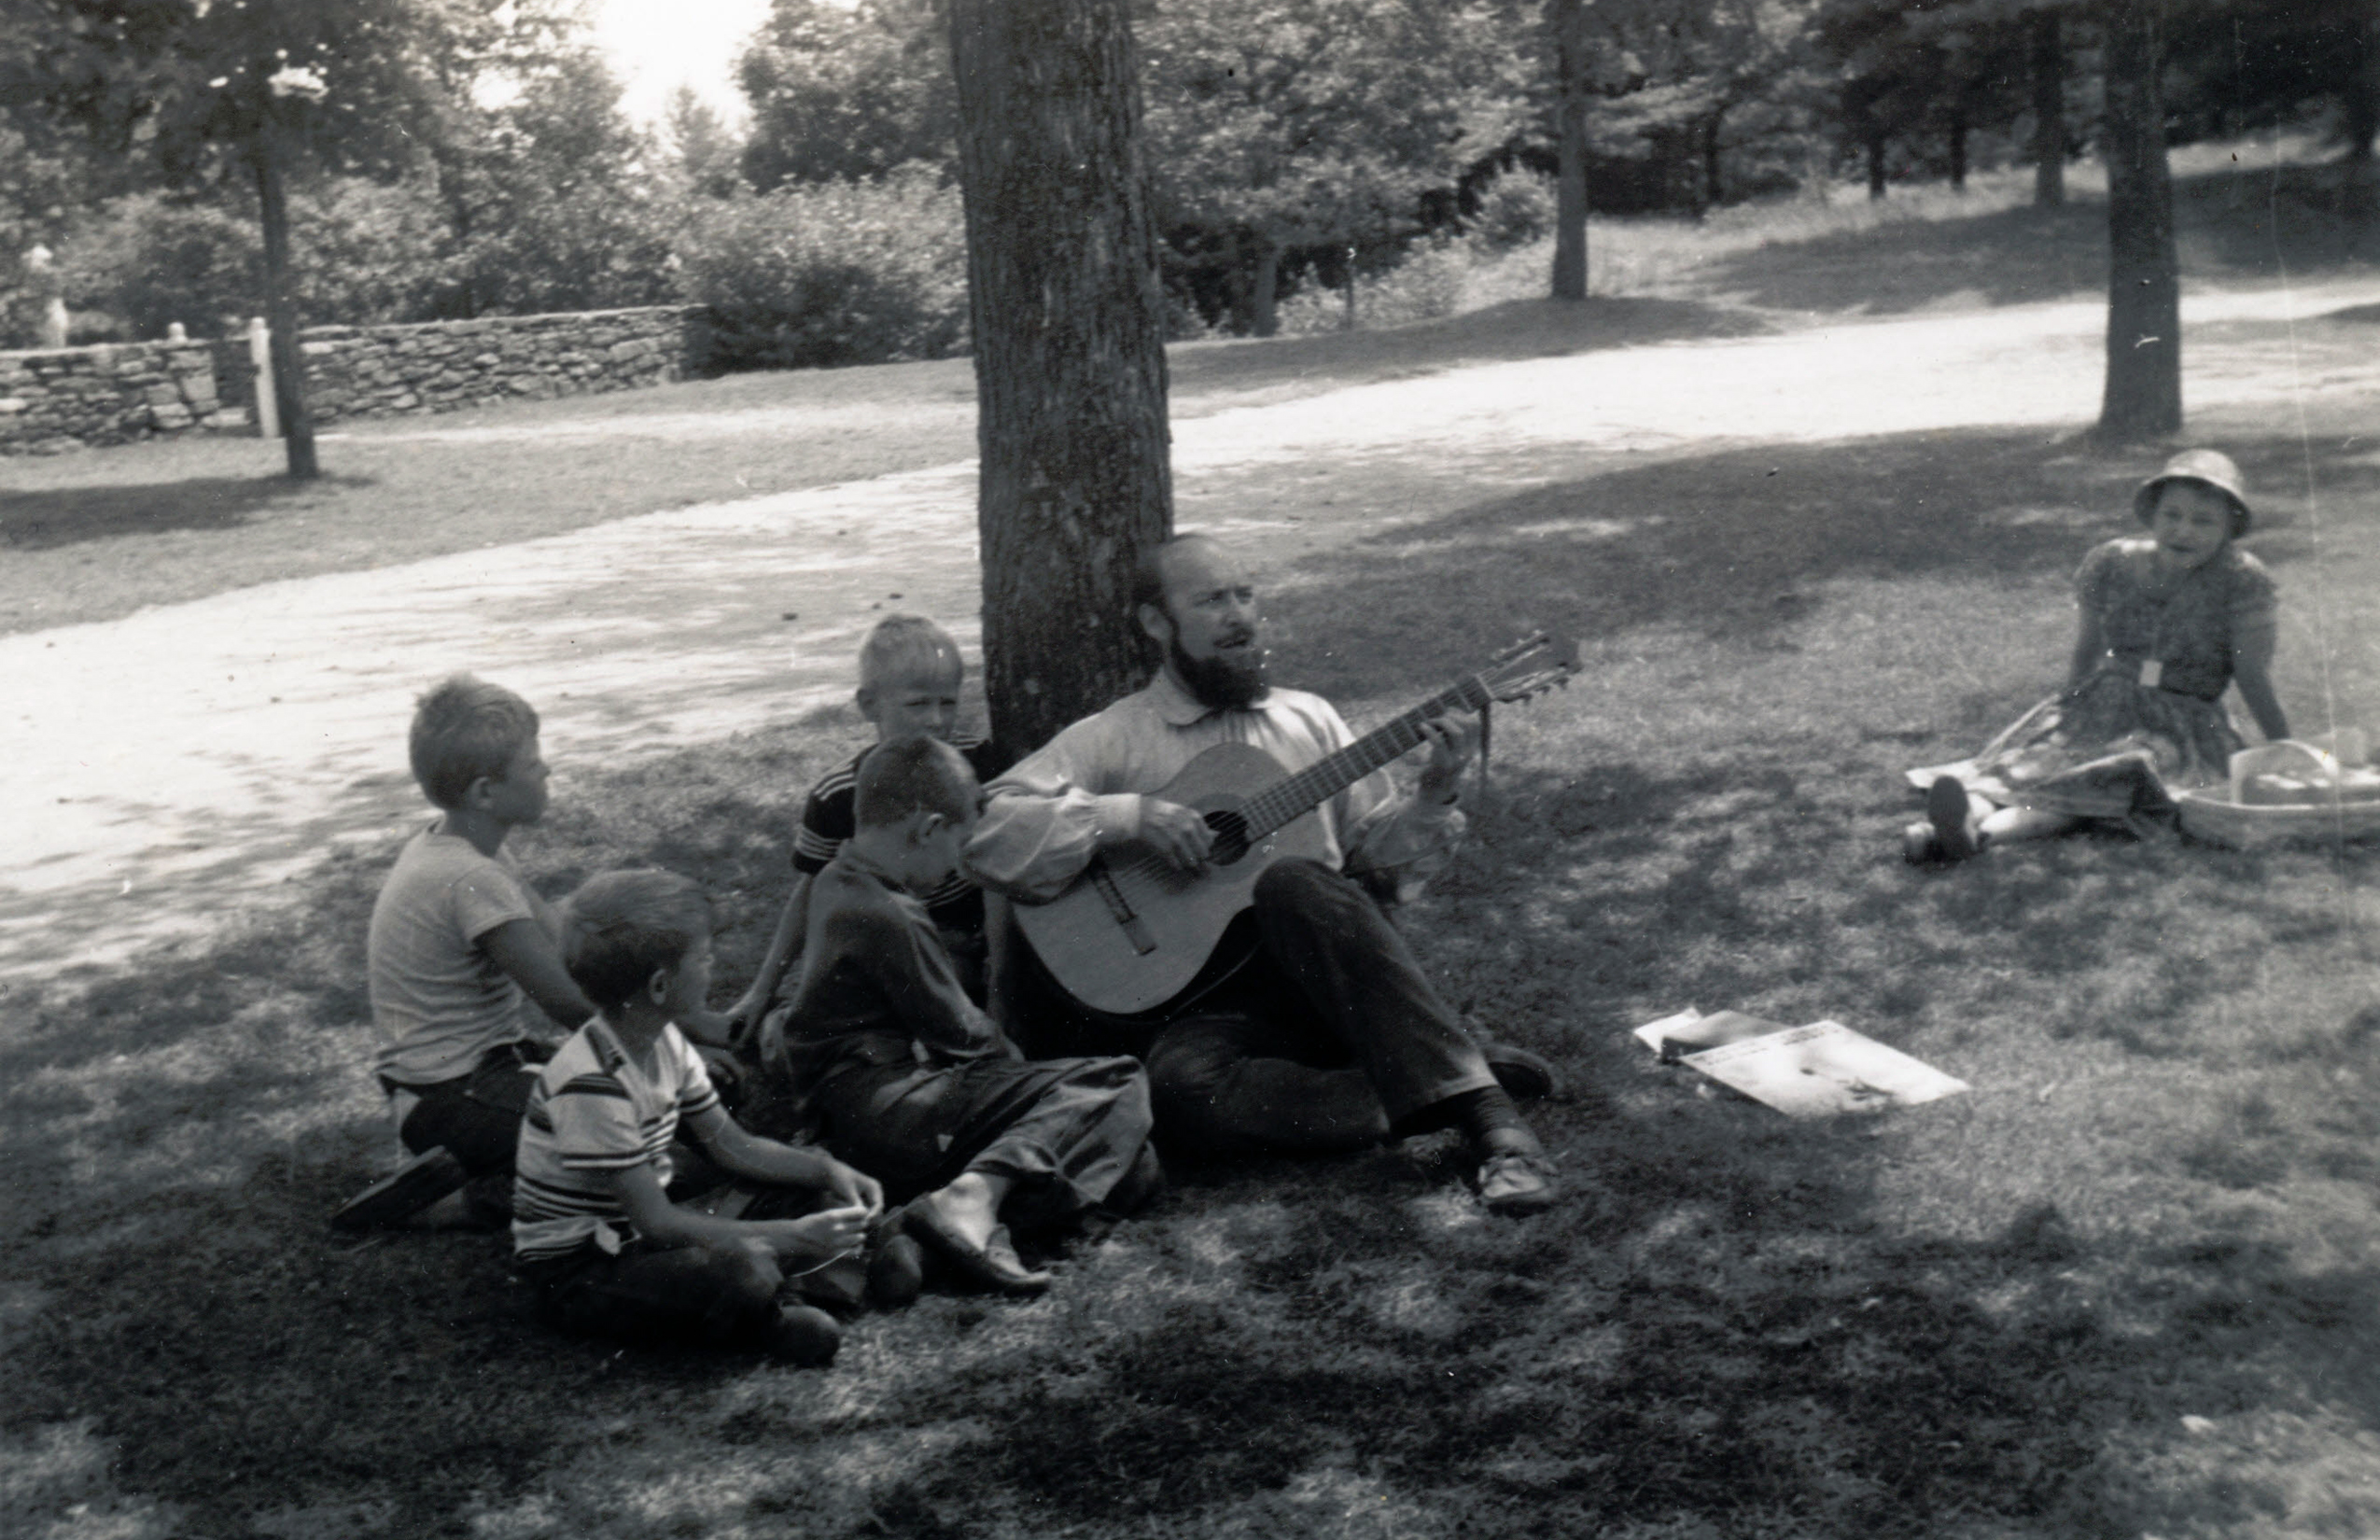 Bill, playing the guitar with an audience of four children